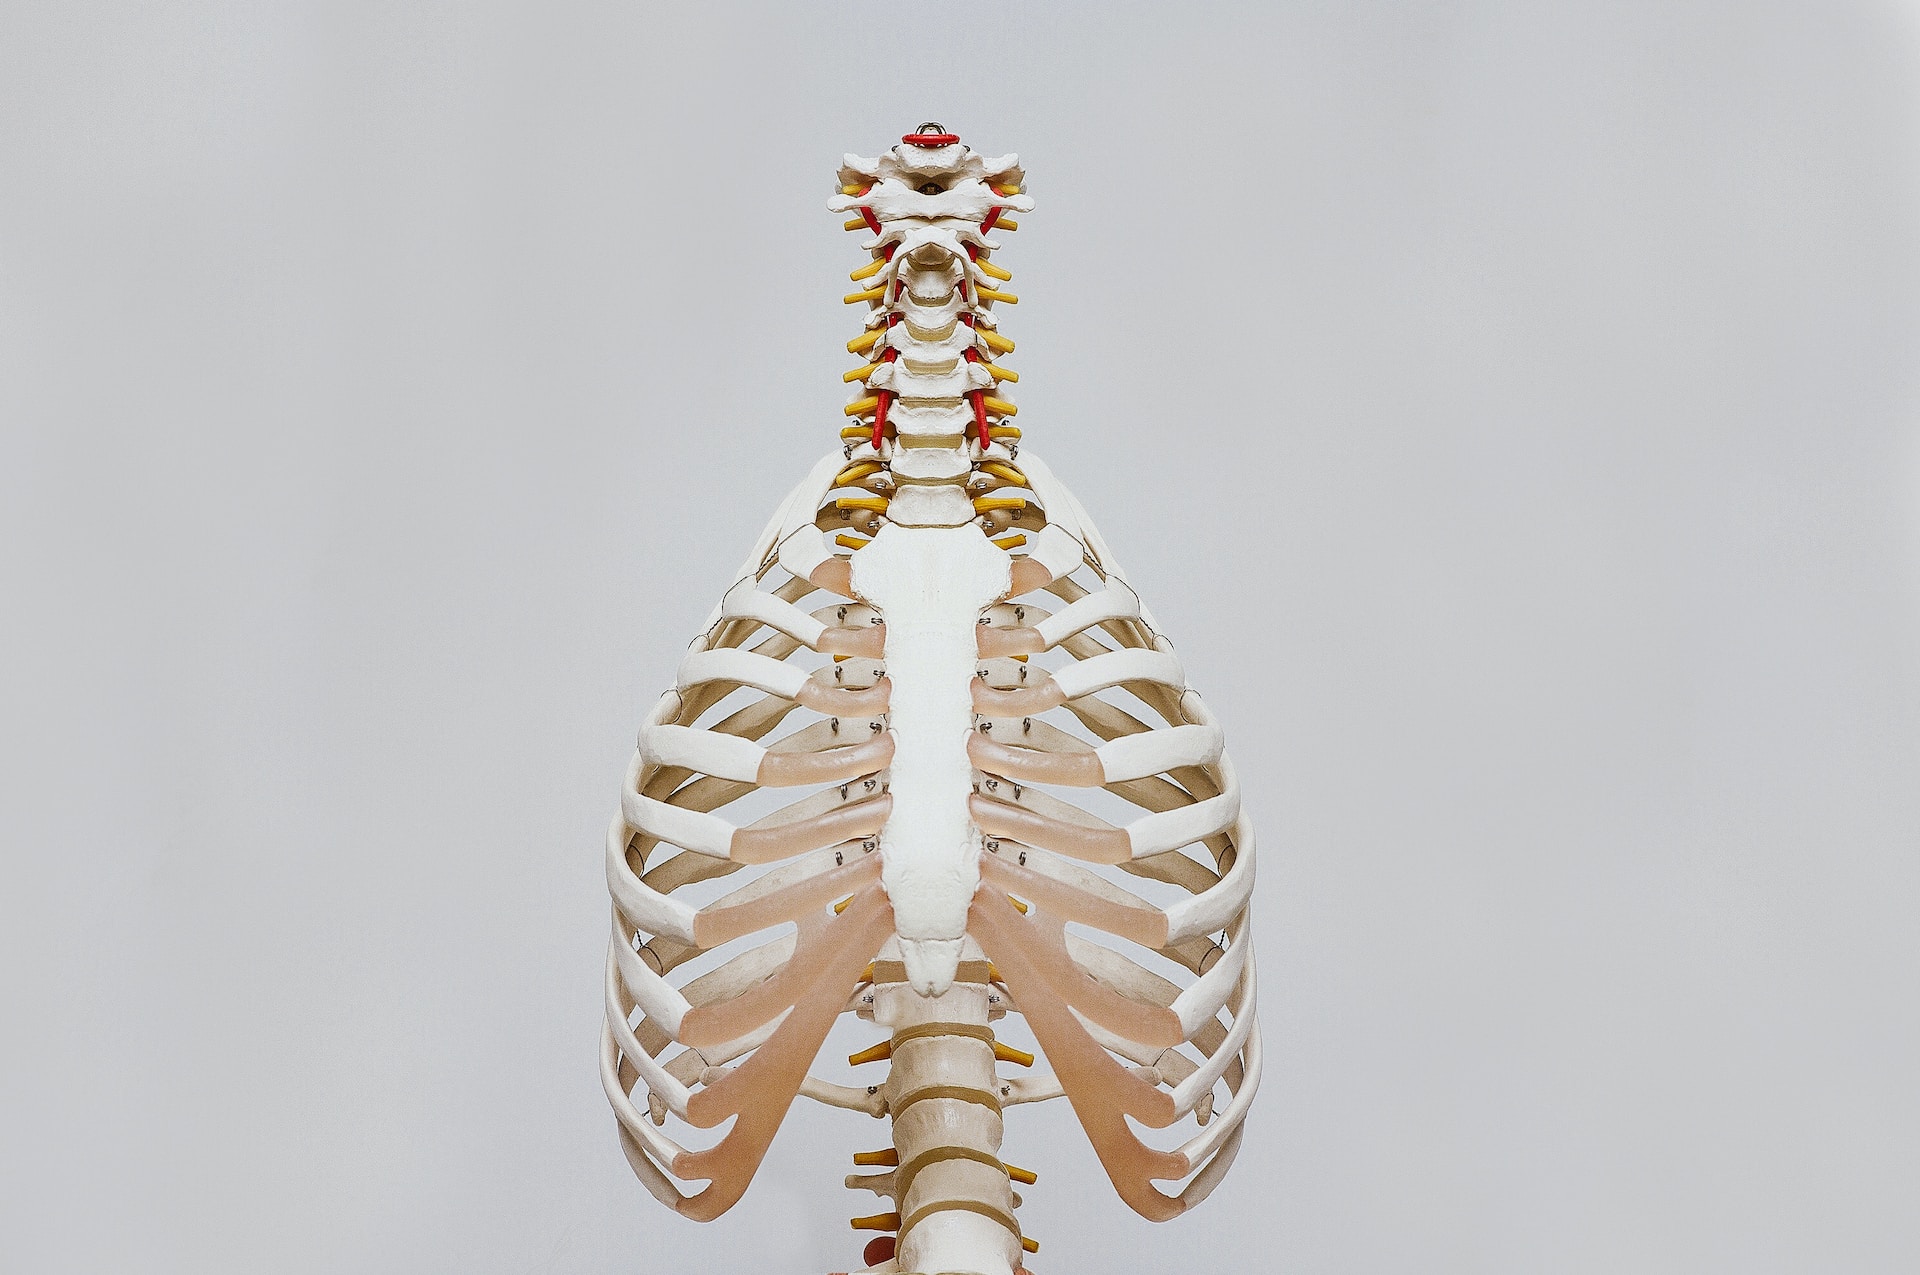 Representation of rib cage and spine